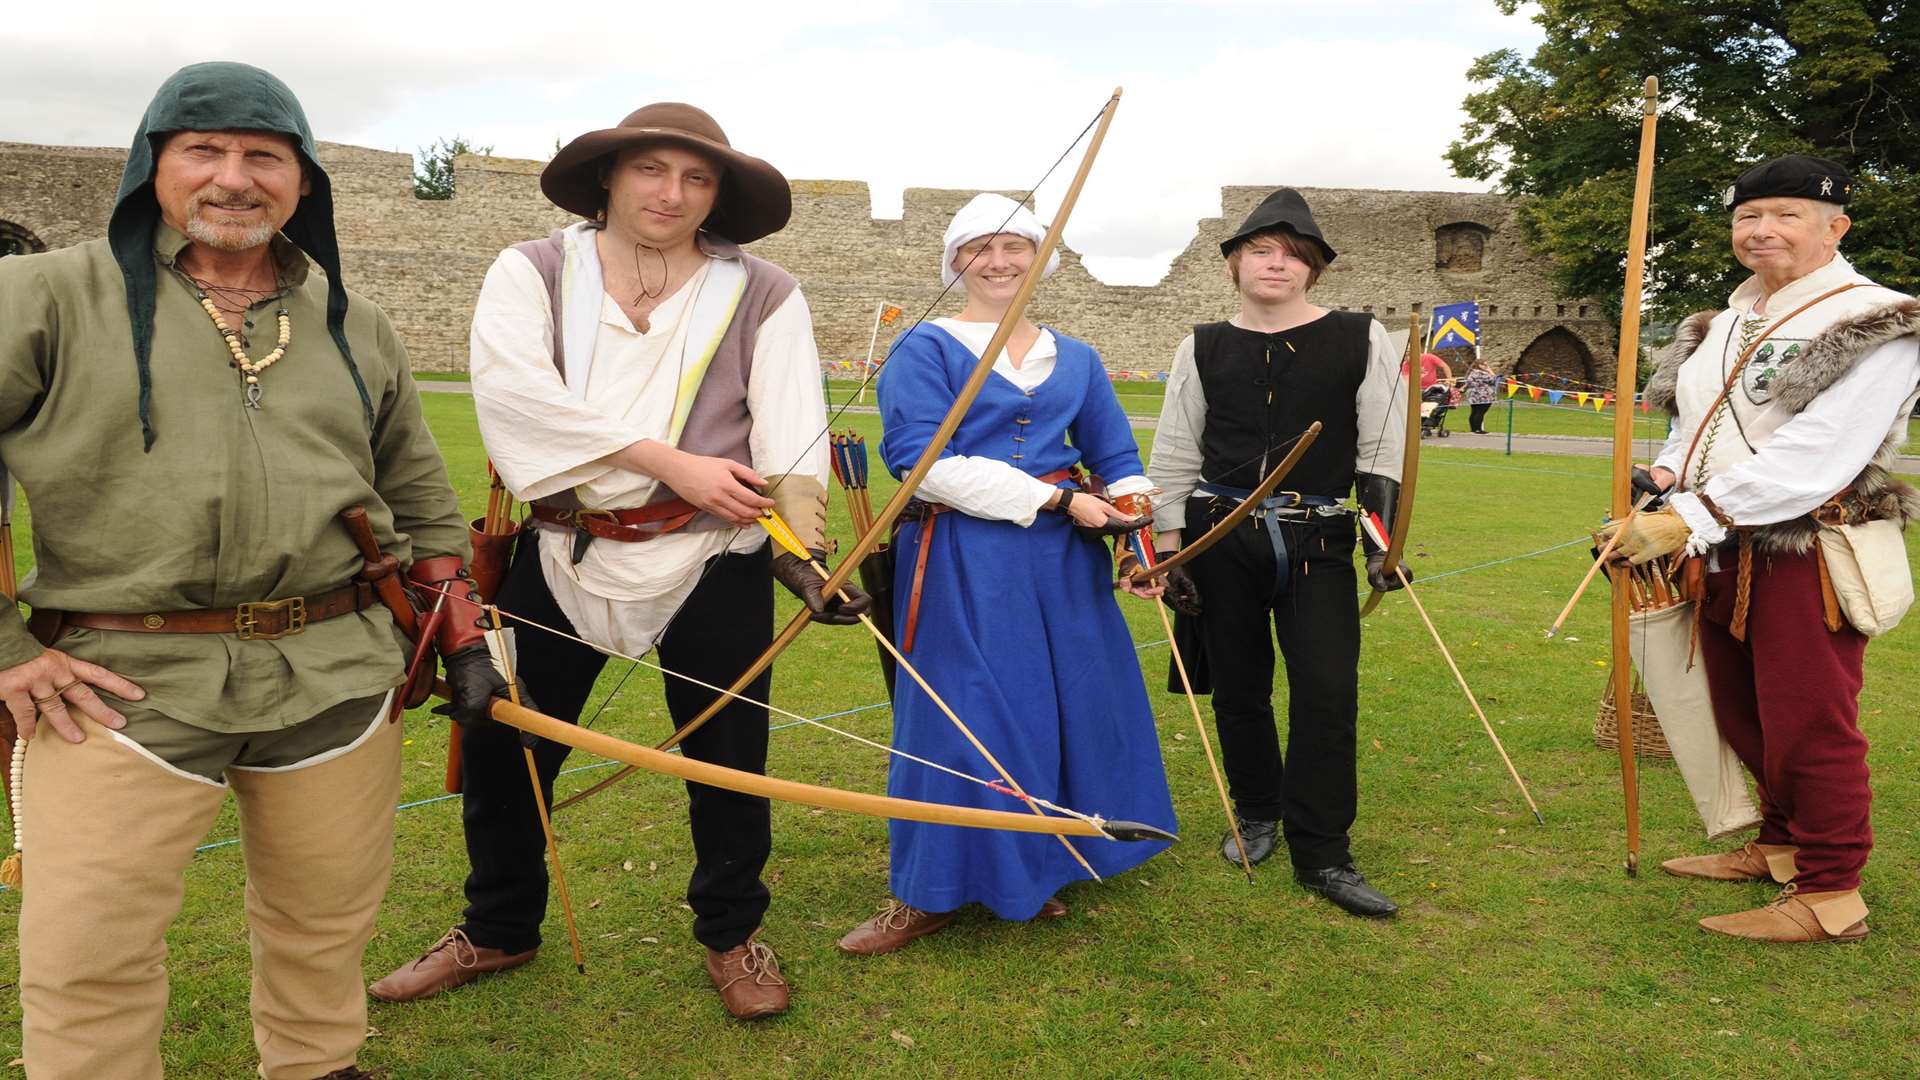 Archers at the Medieval Merriment weekend. Pic: Steve Crispe